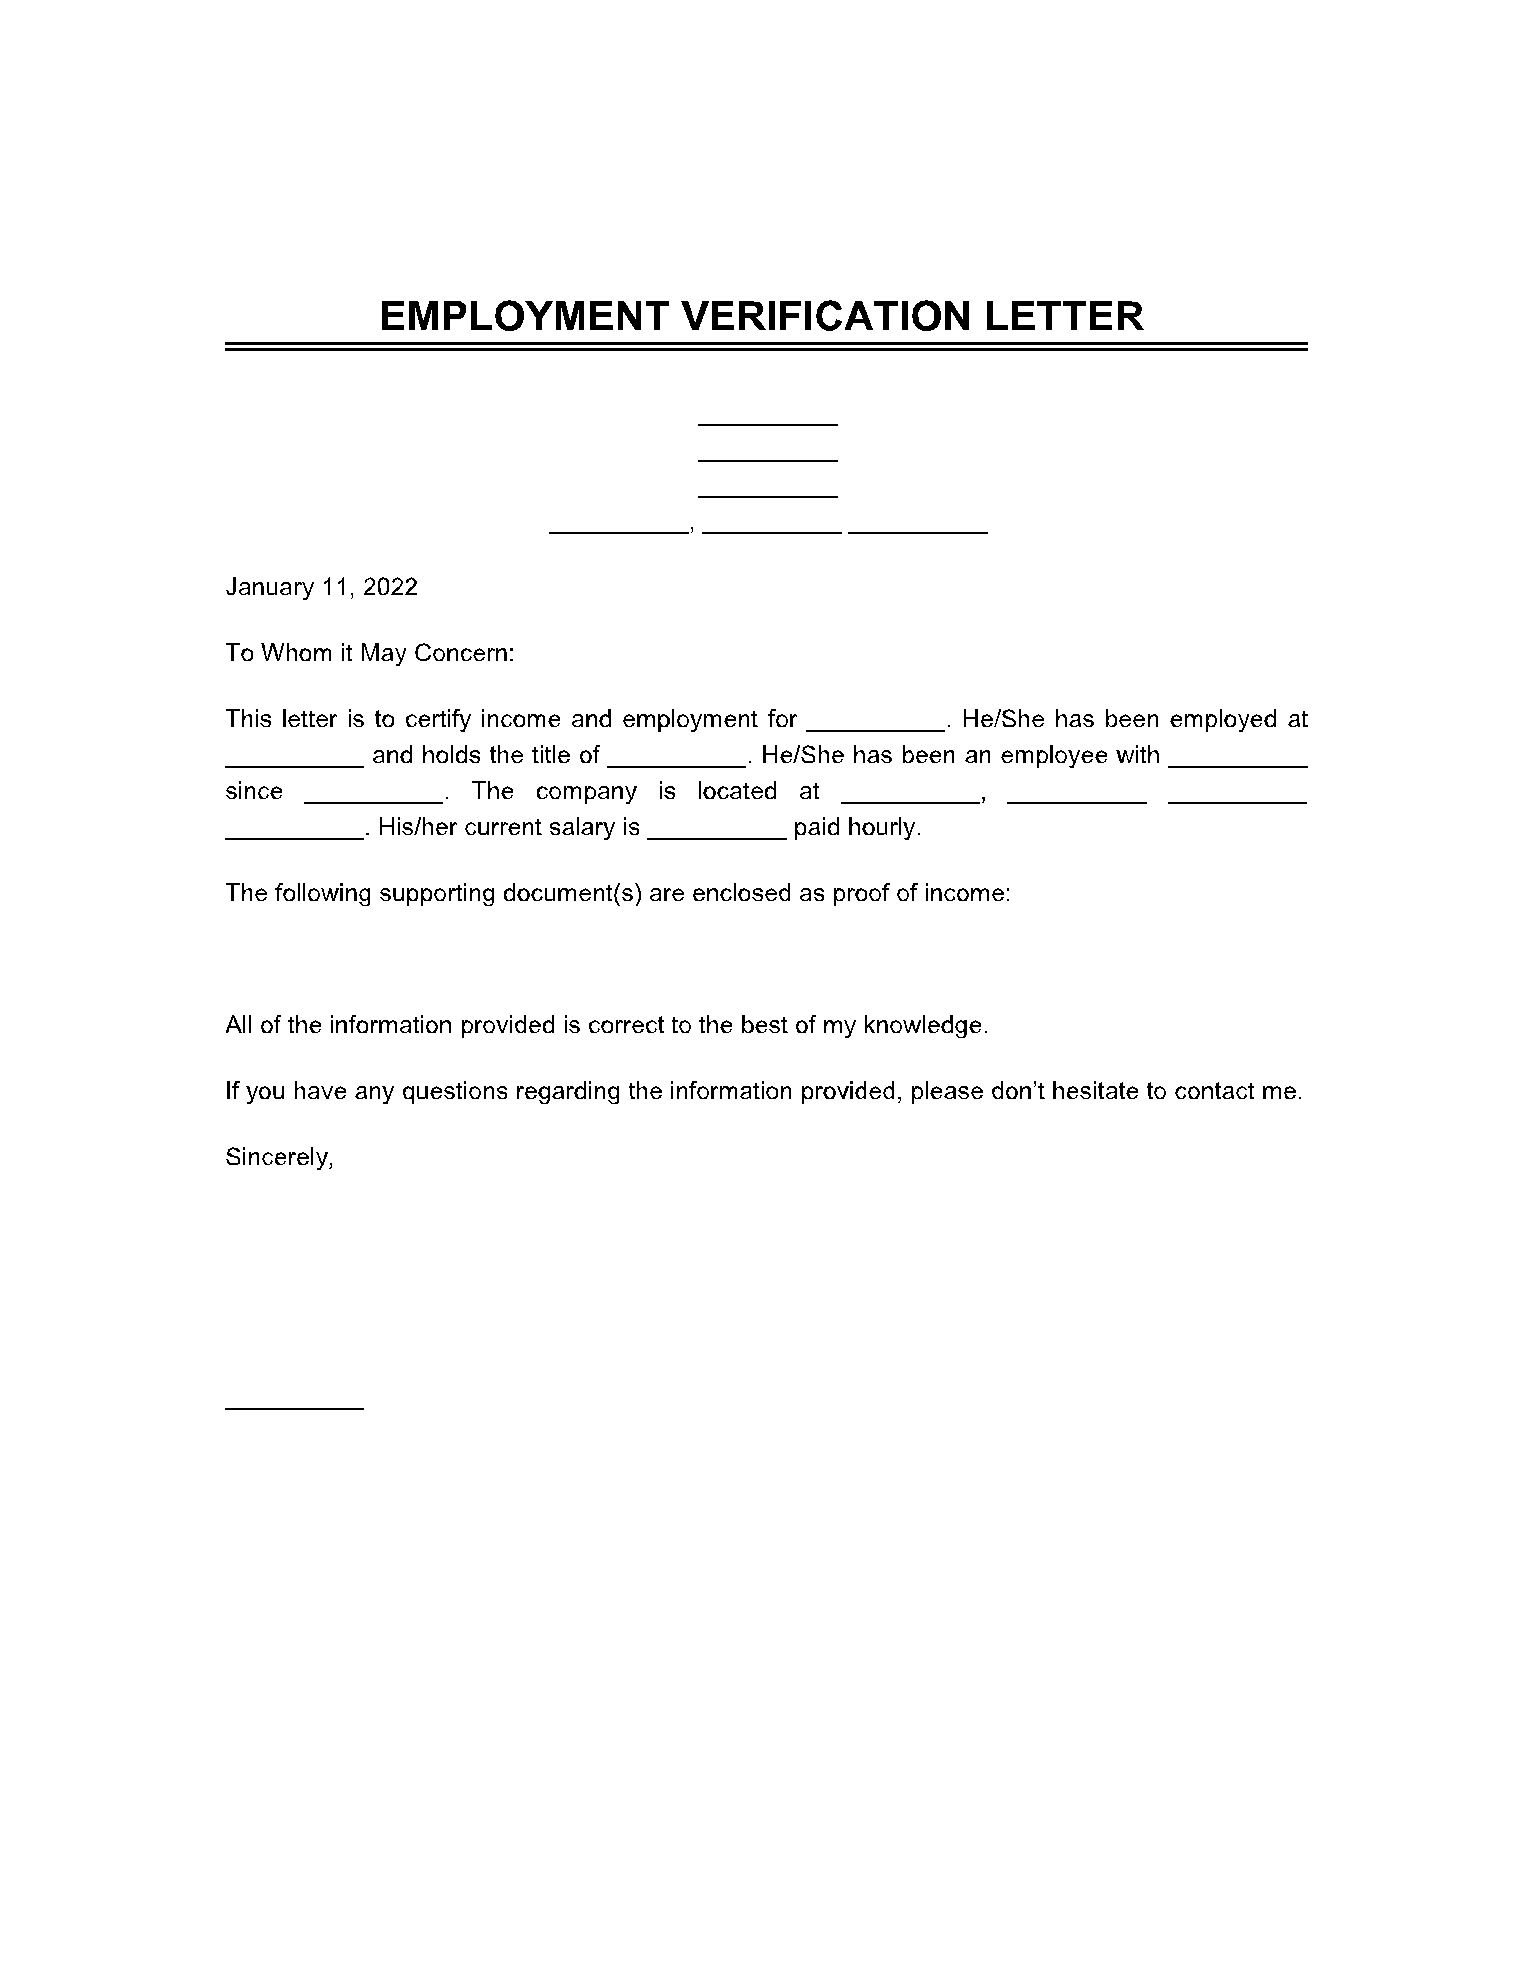 Employment Verification Letter: Get Free Sample Now (20) Throughout Employment Verification Letter Template Word